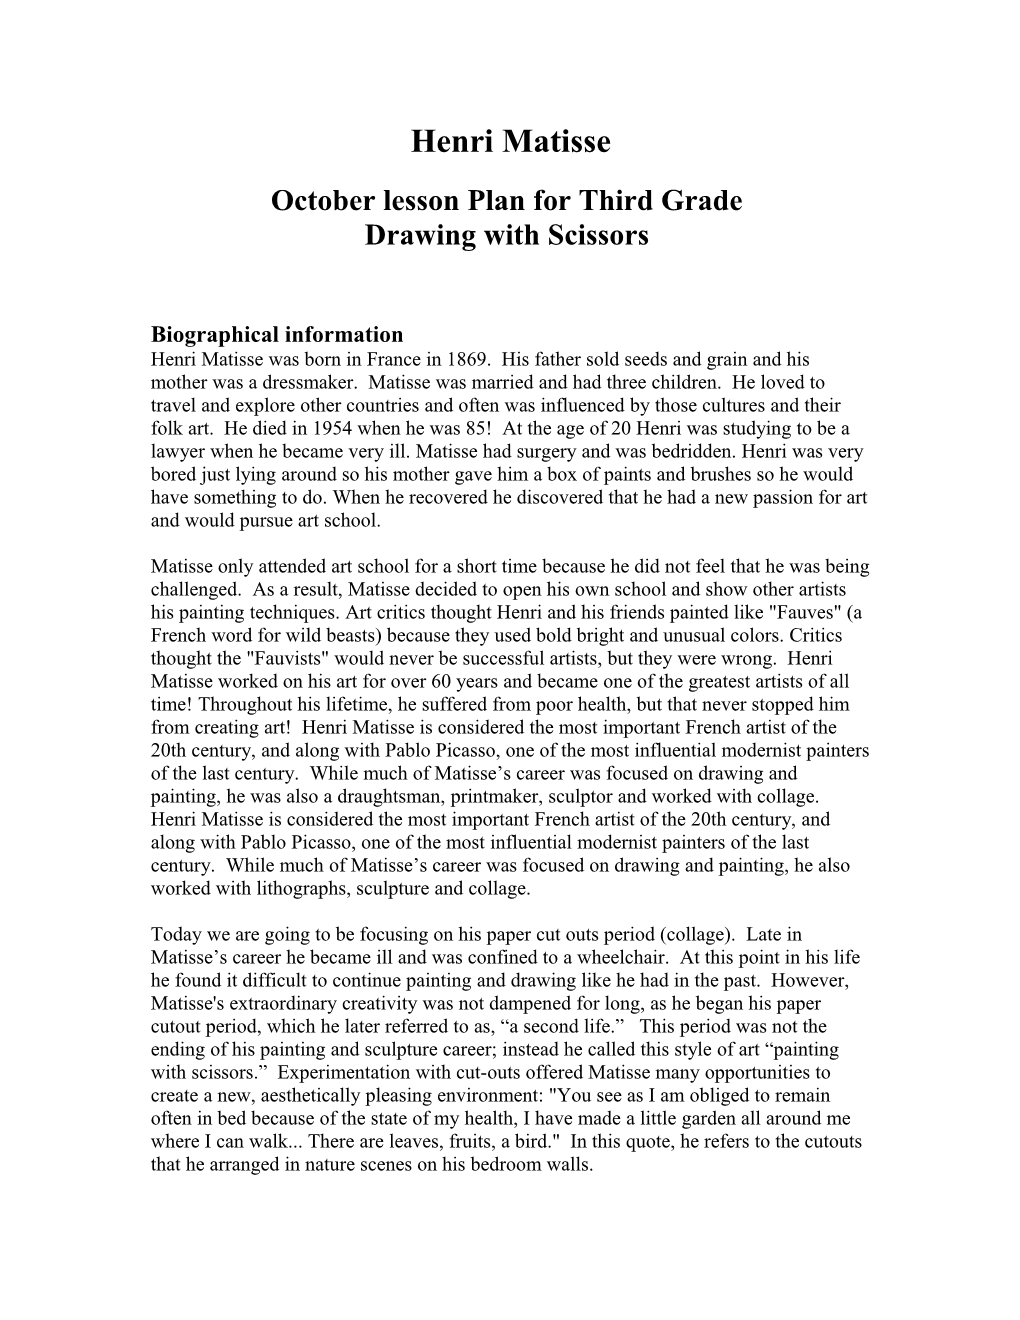 October Lesson Plan for Third Grade